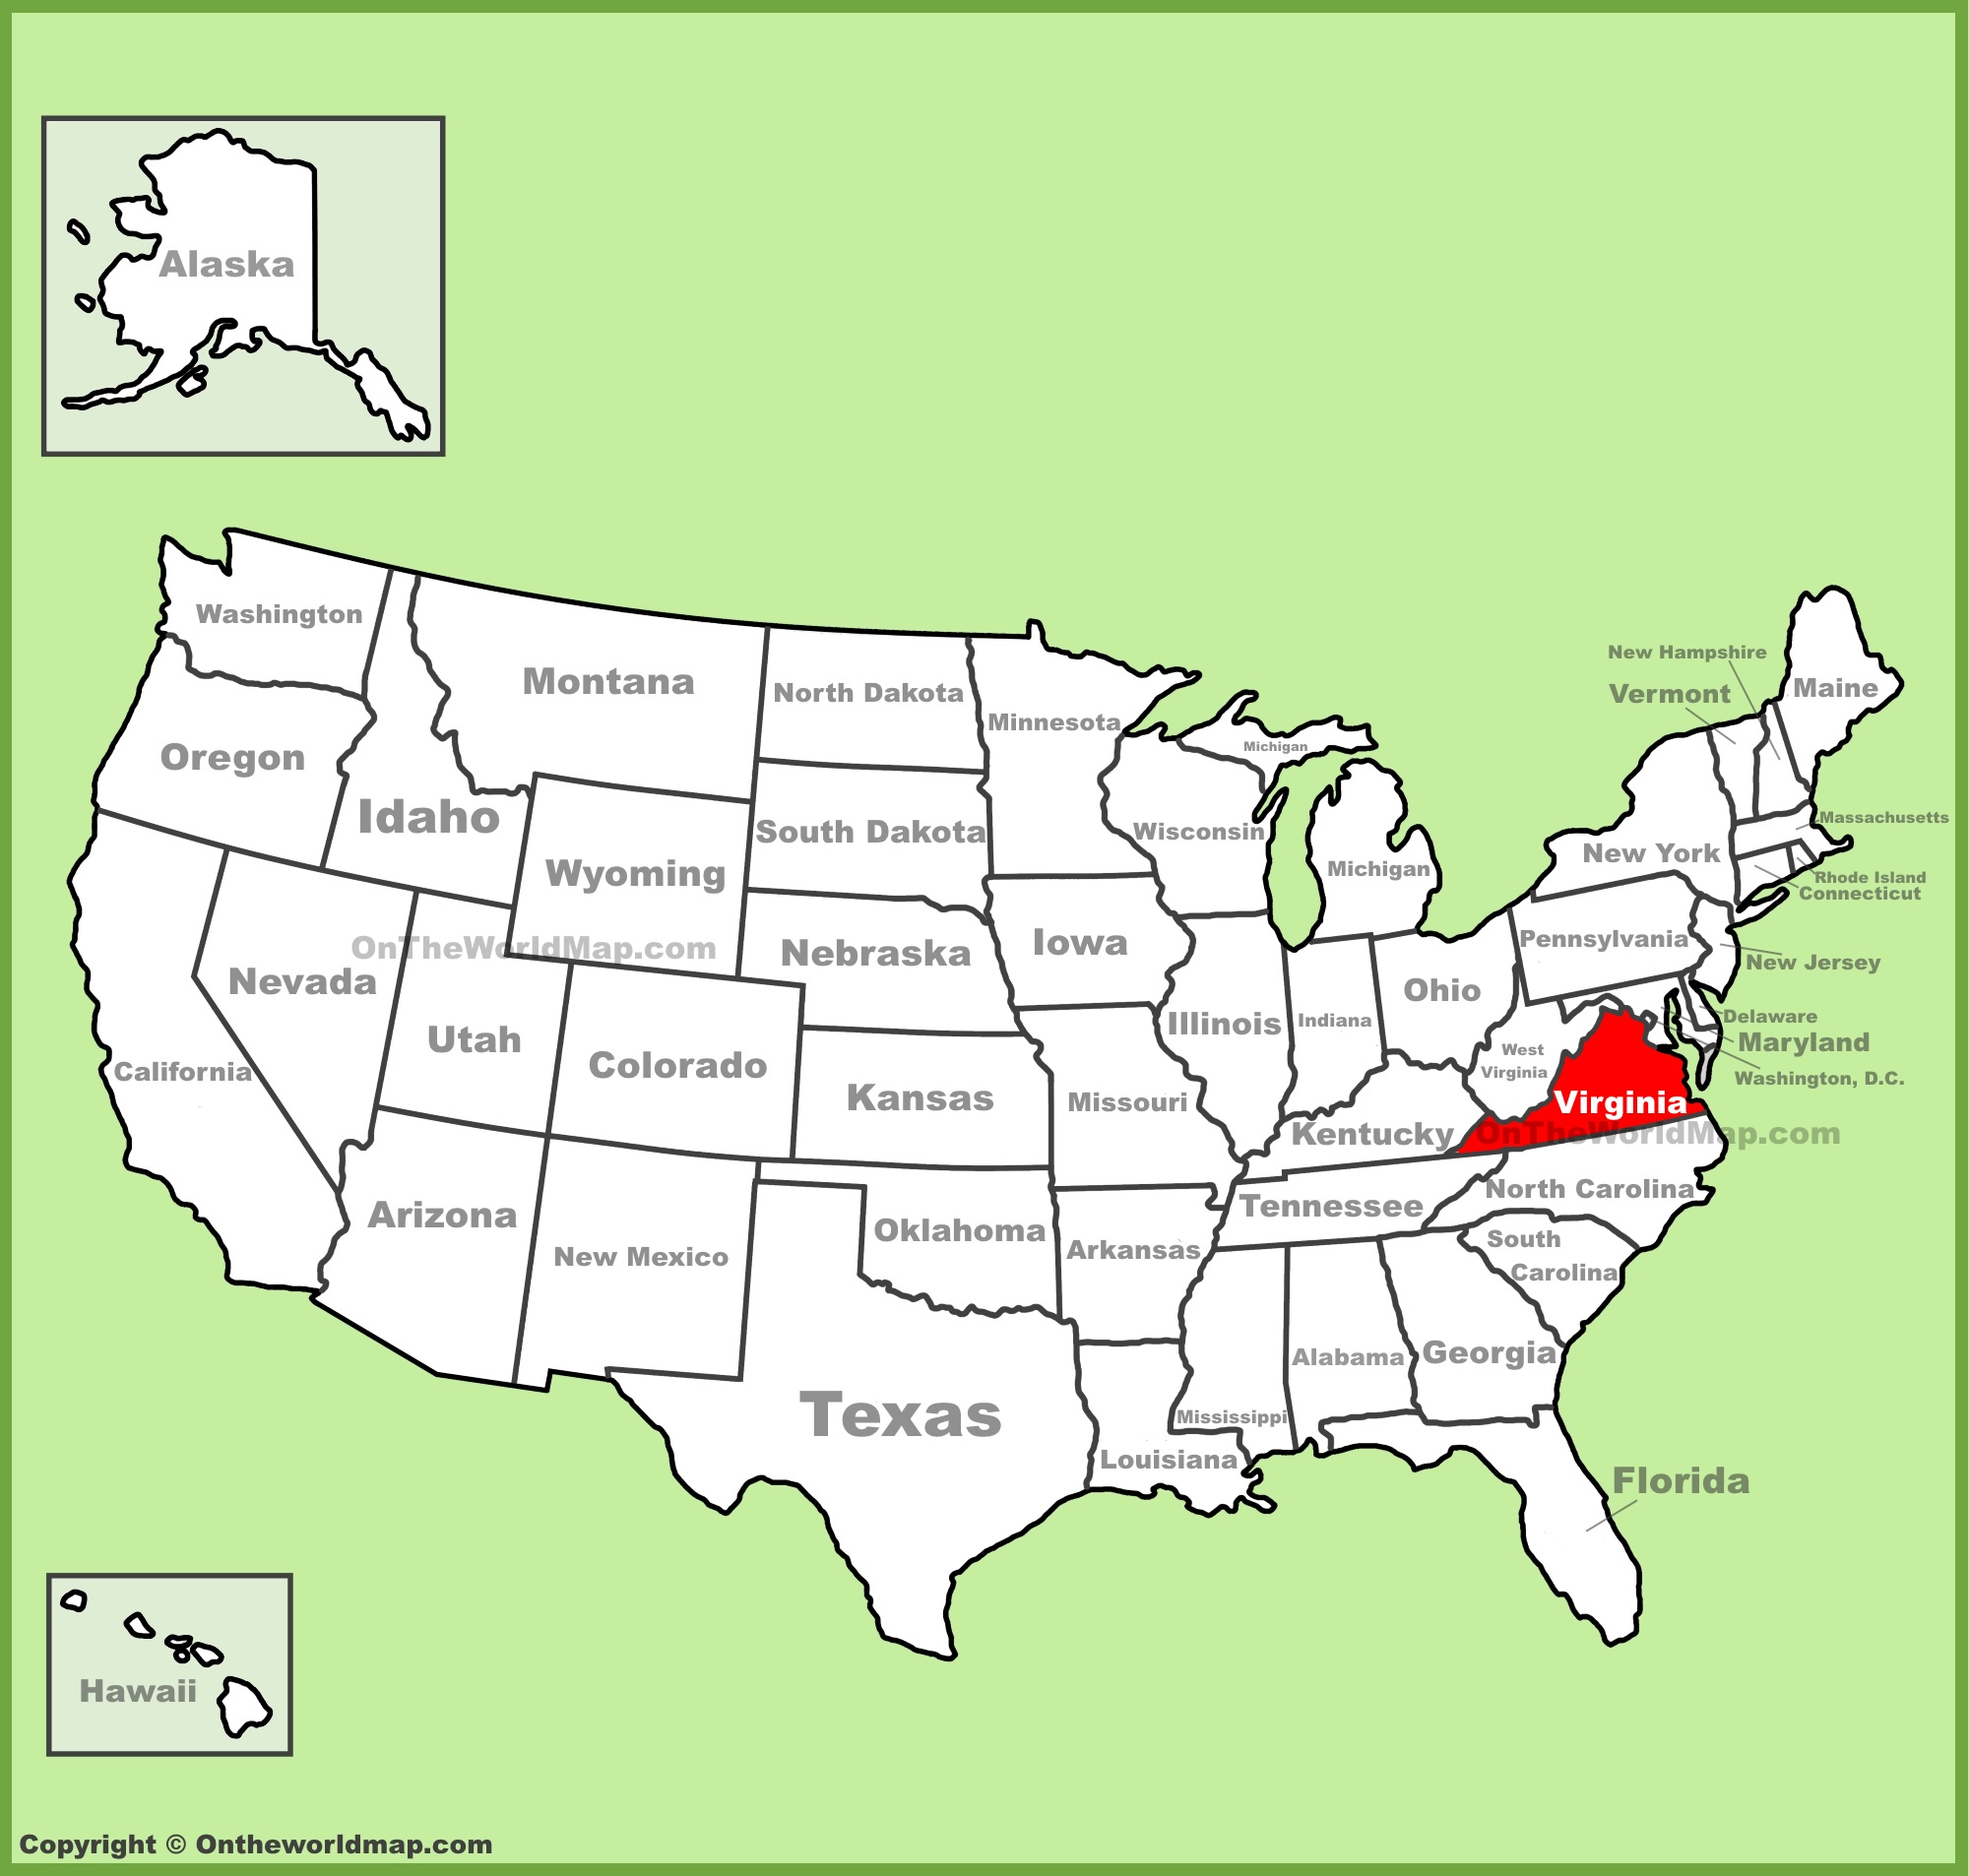 Virginia Location On The Us Map 